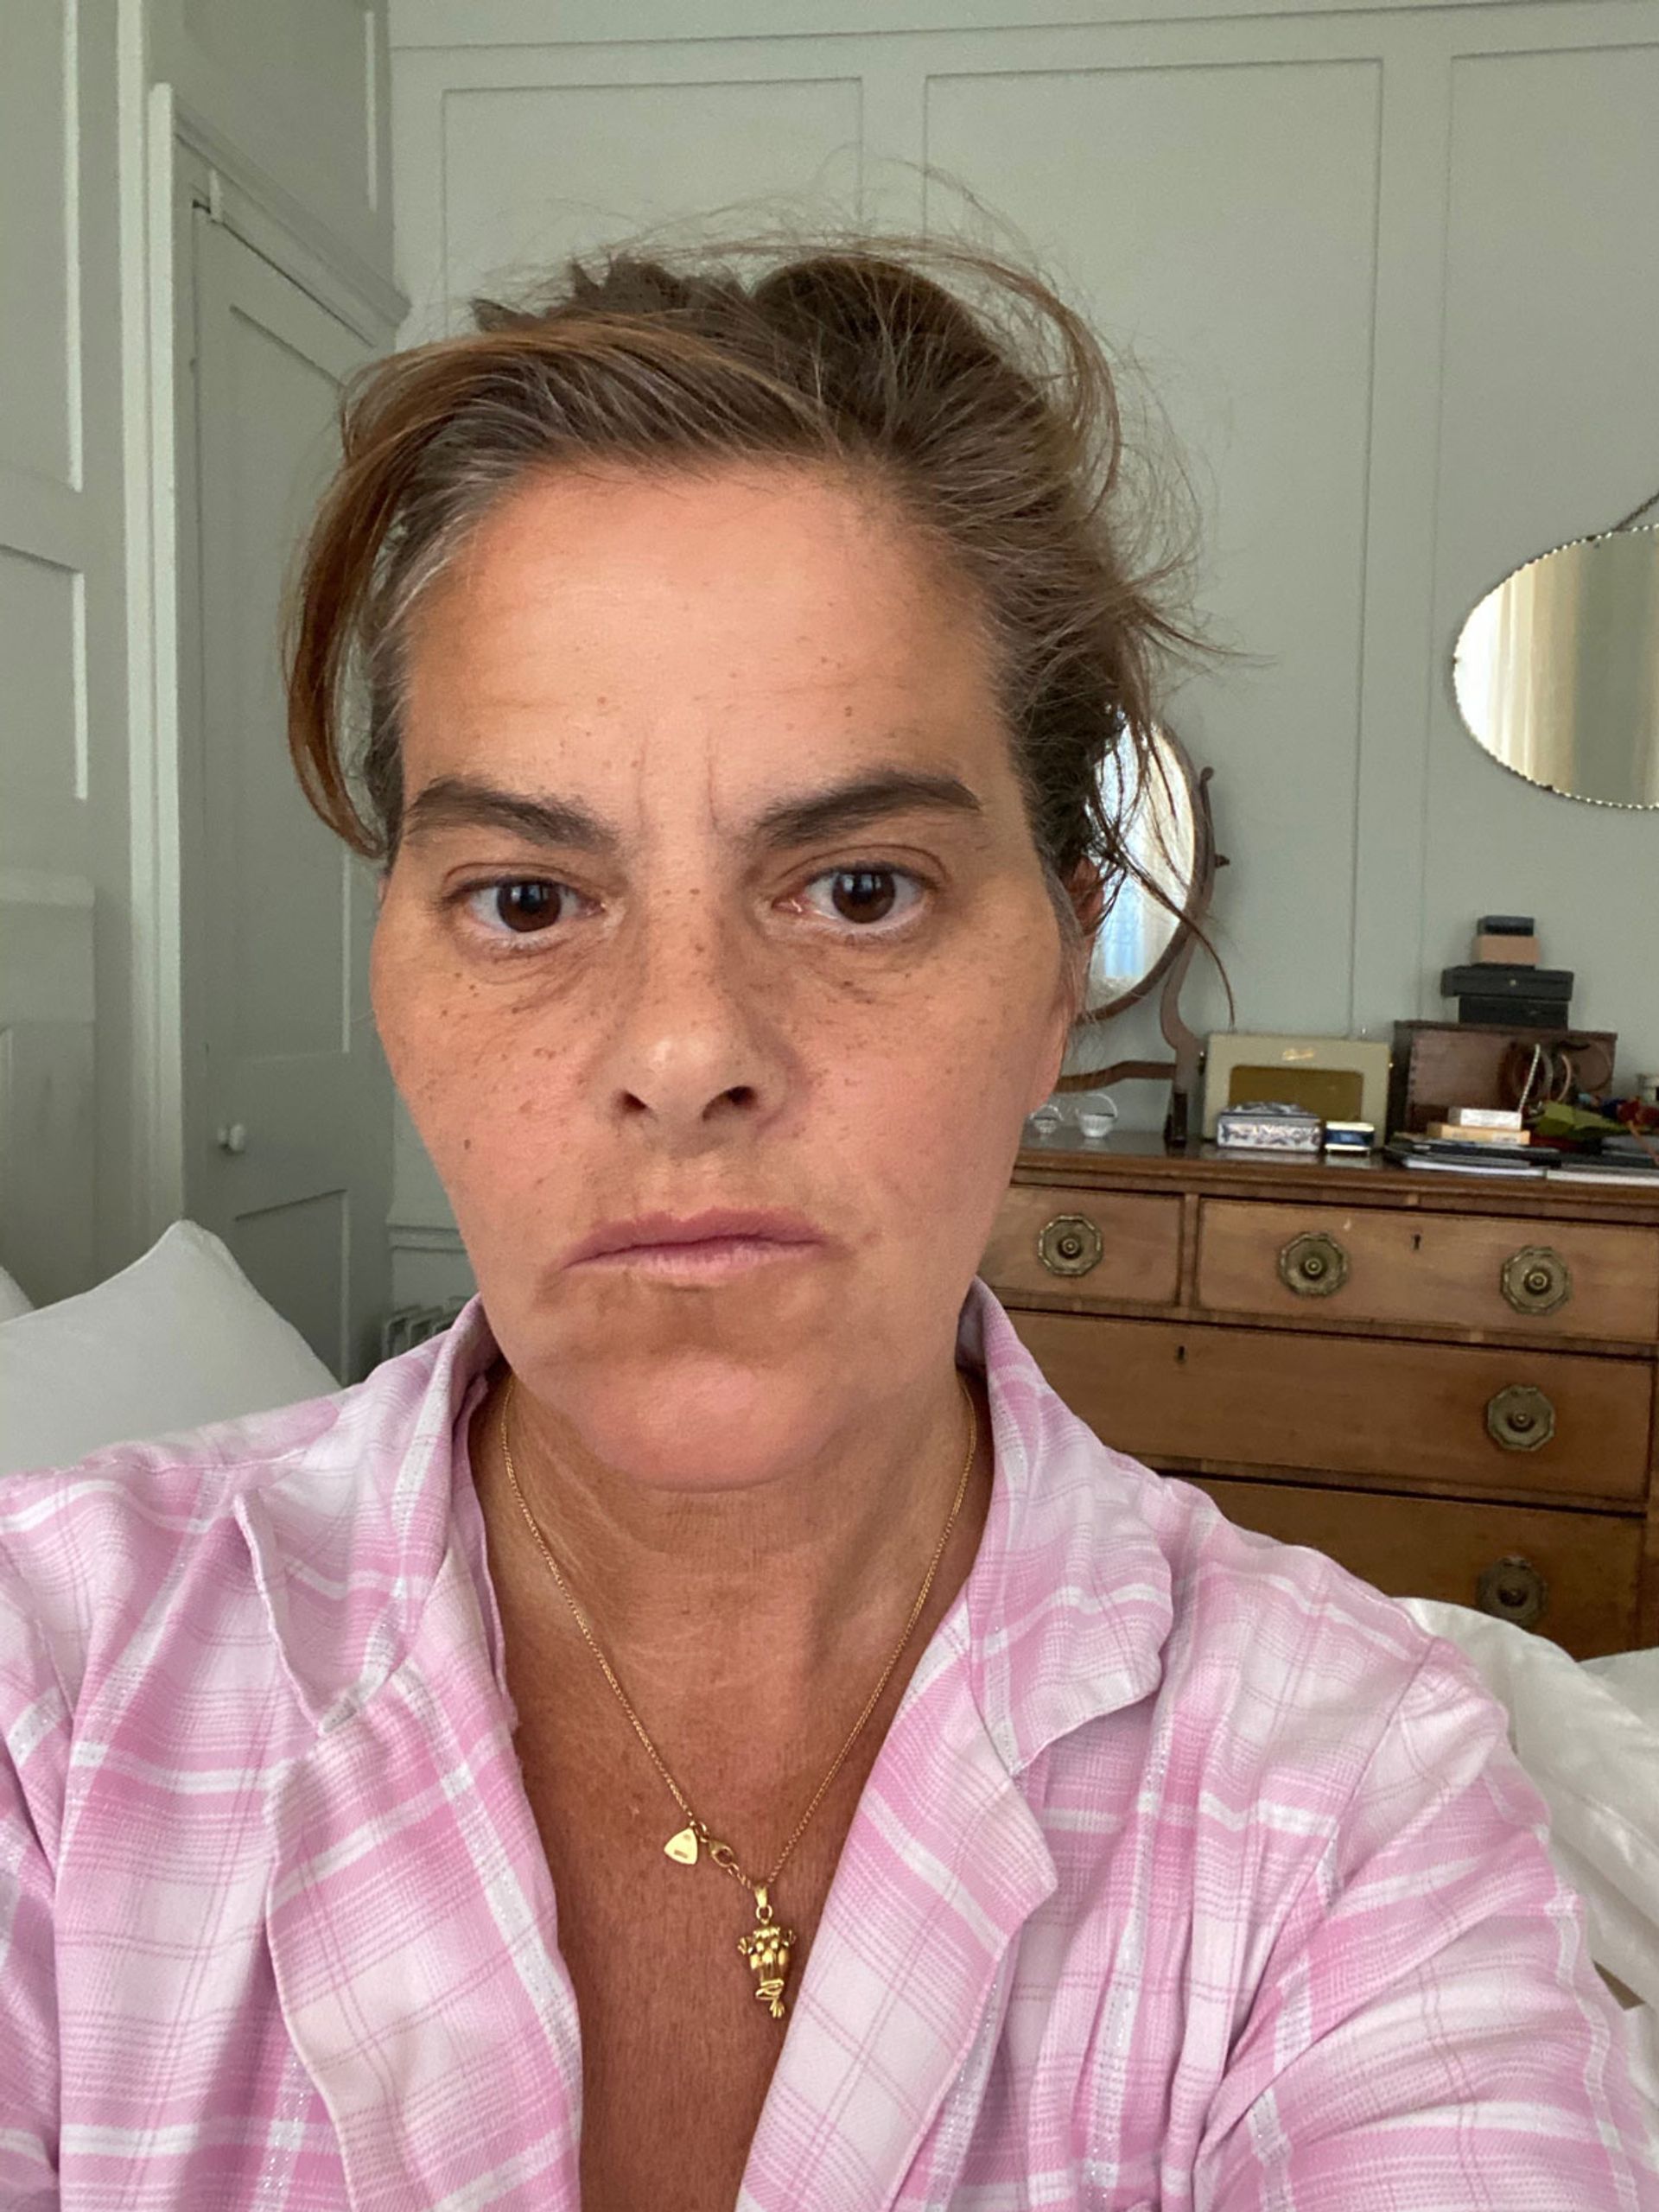 A self portrait of Tracey Emin, taken at her London home during isolation © Tracey Emin